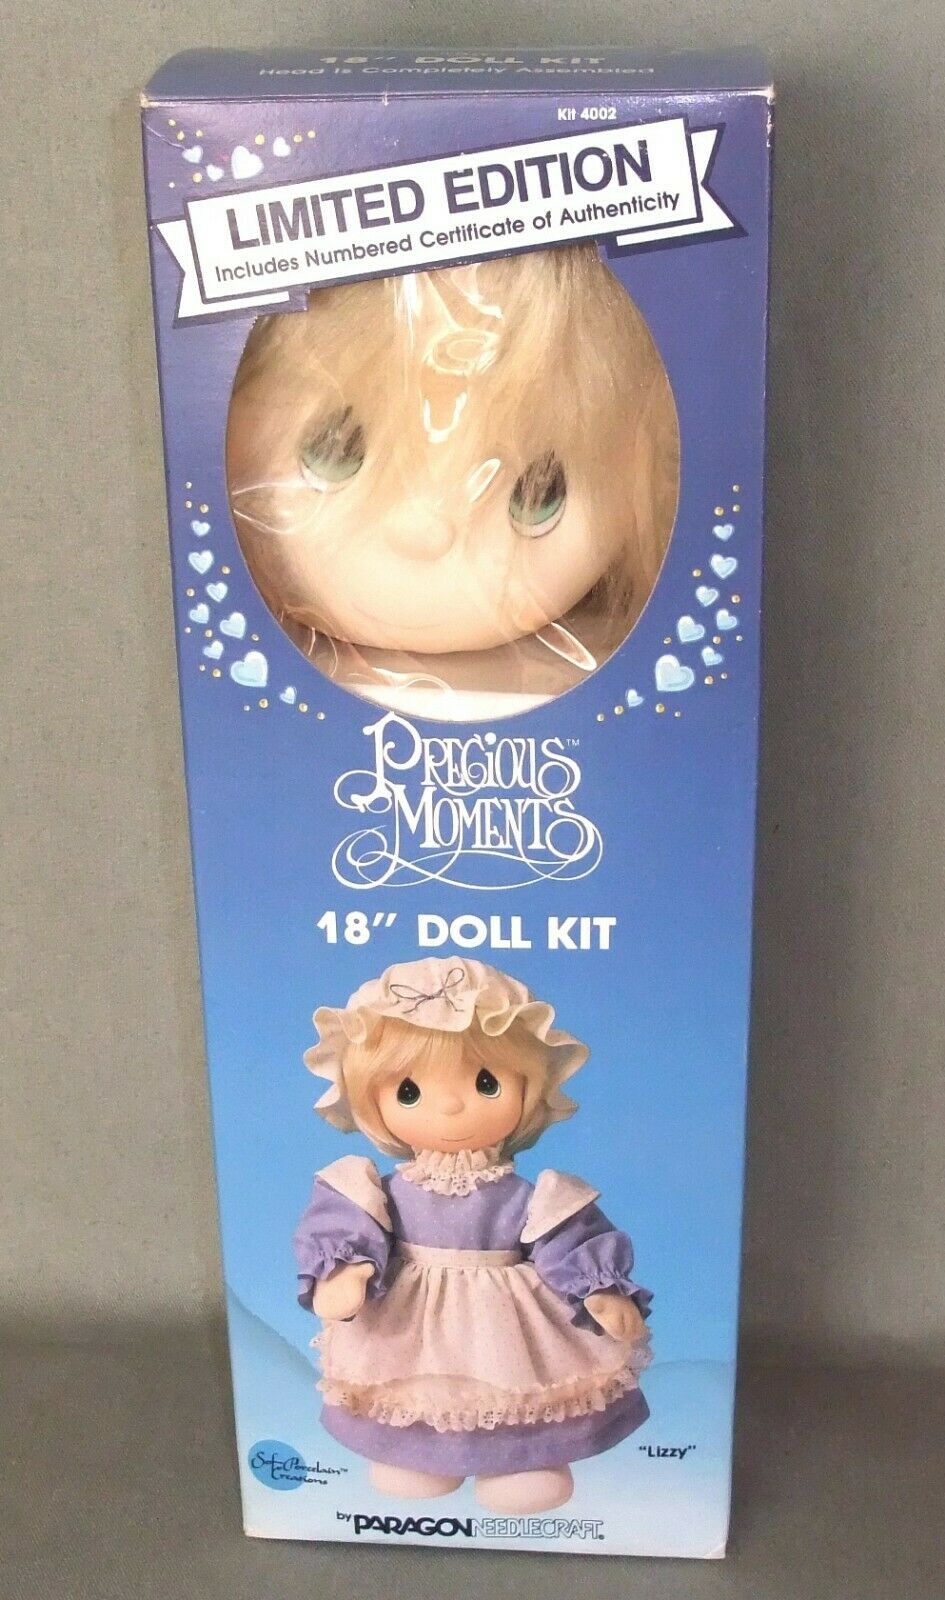 Precious Moments Lizzie 18" Doll Kit Limited Edition 1985 Paragon Needlecraft